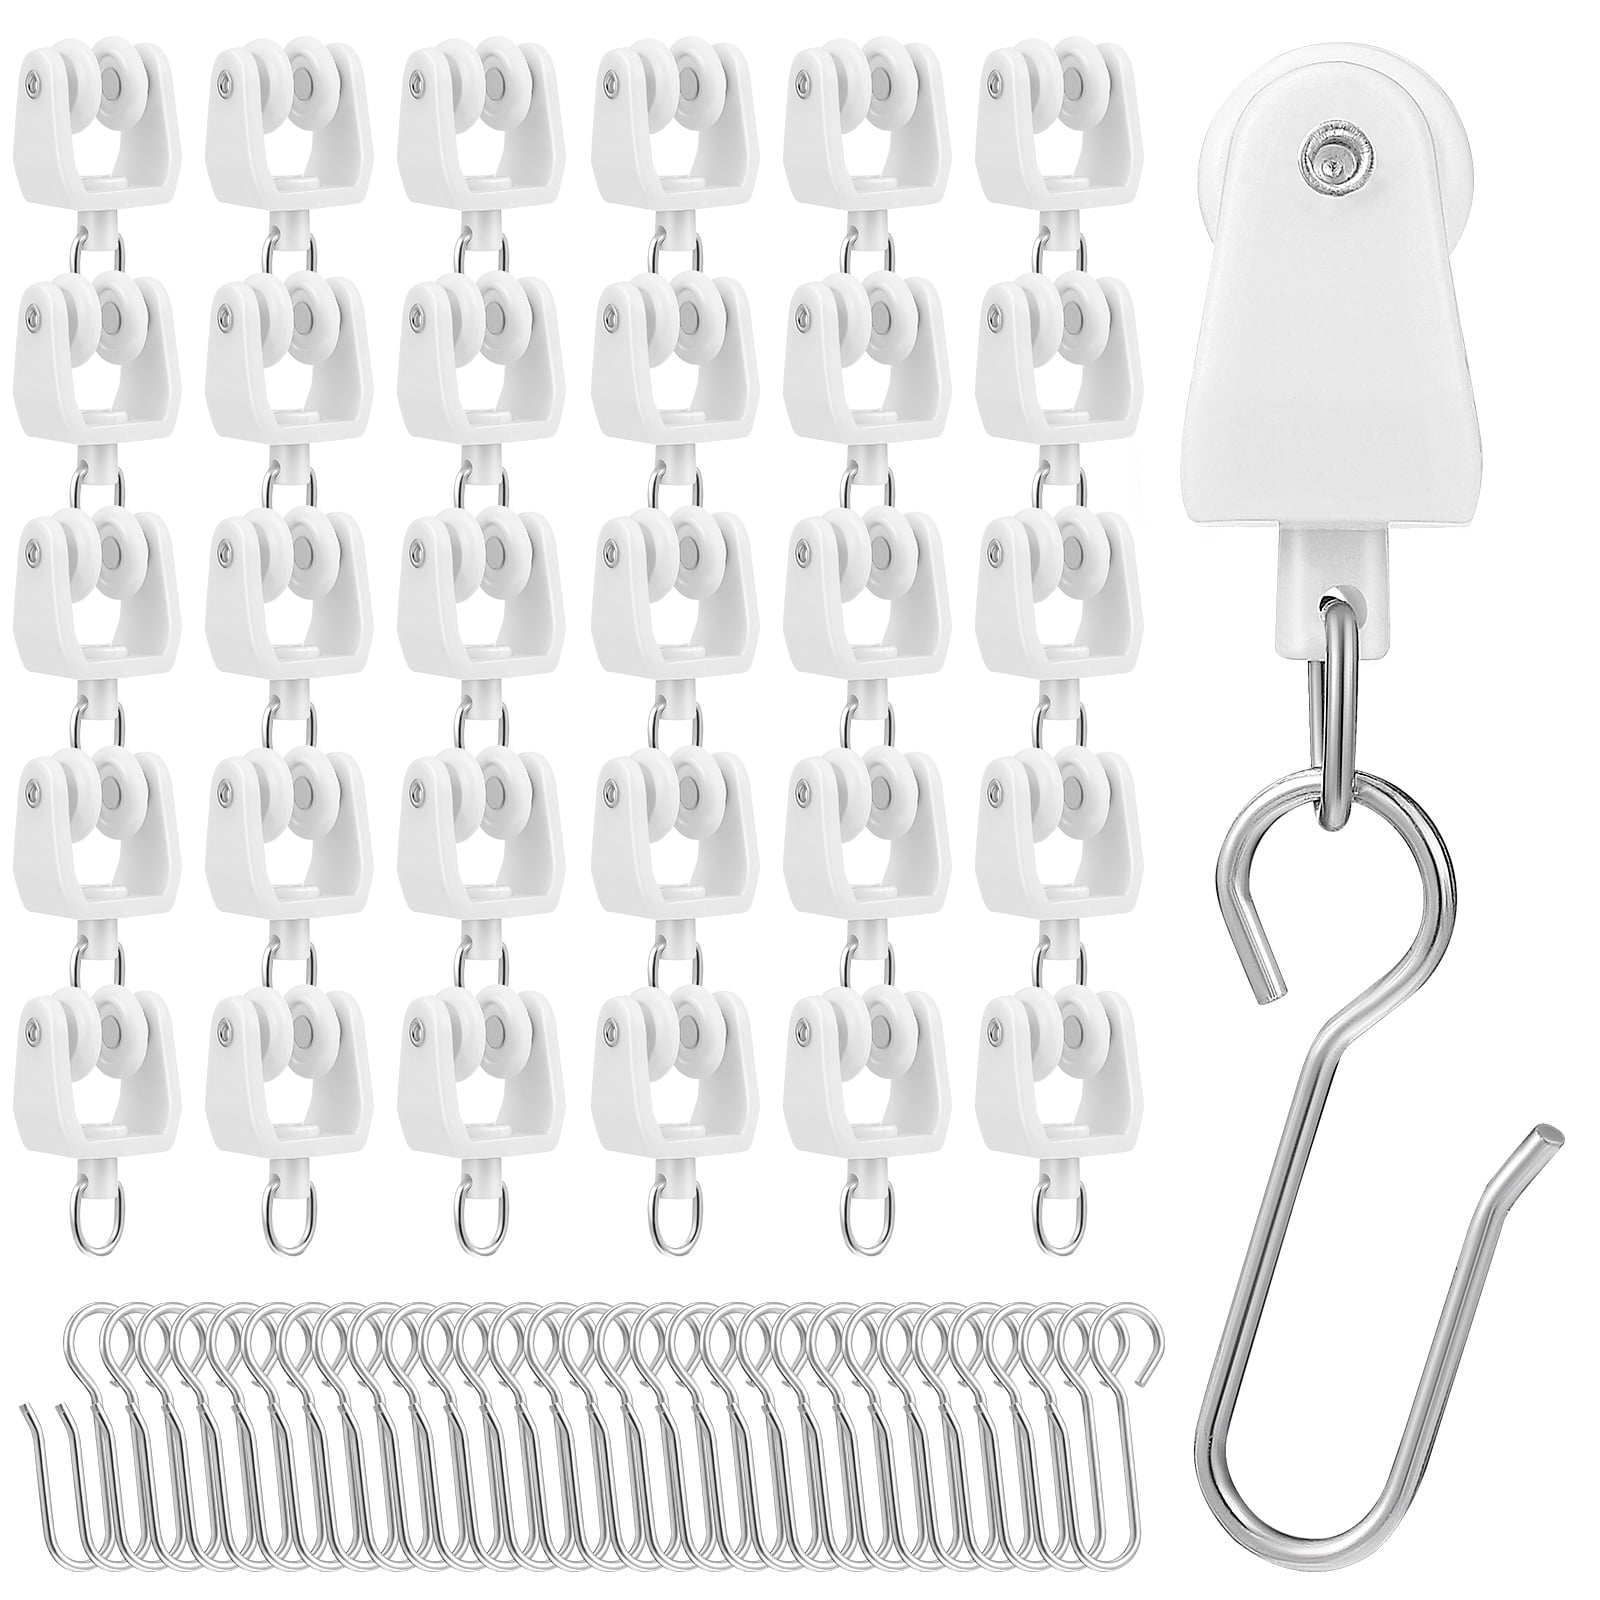 InStyleDesign 10 Ball Bearing Carrier with Stainless Hooks for Multi-Purpose Room Divider Track (White)